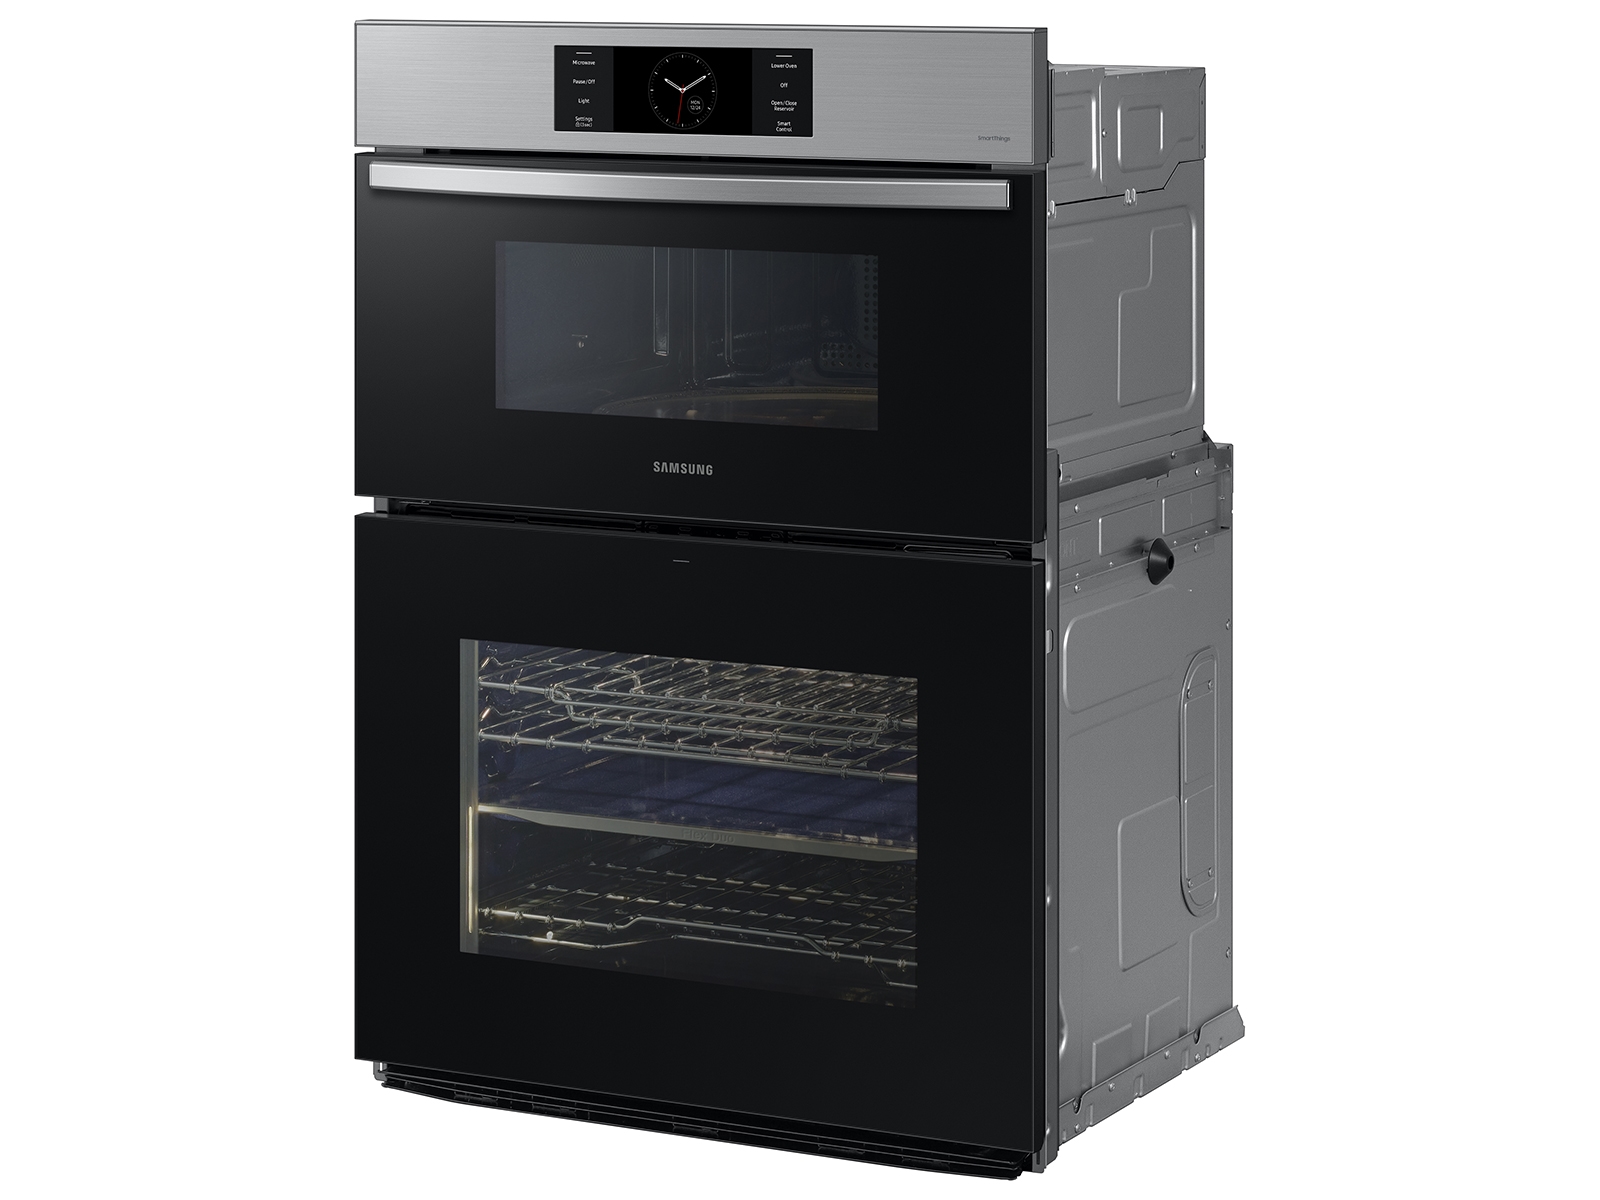 June Launches Its Third-Generation Smart Oven